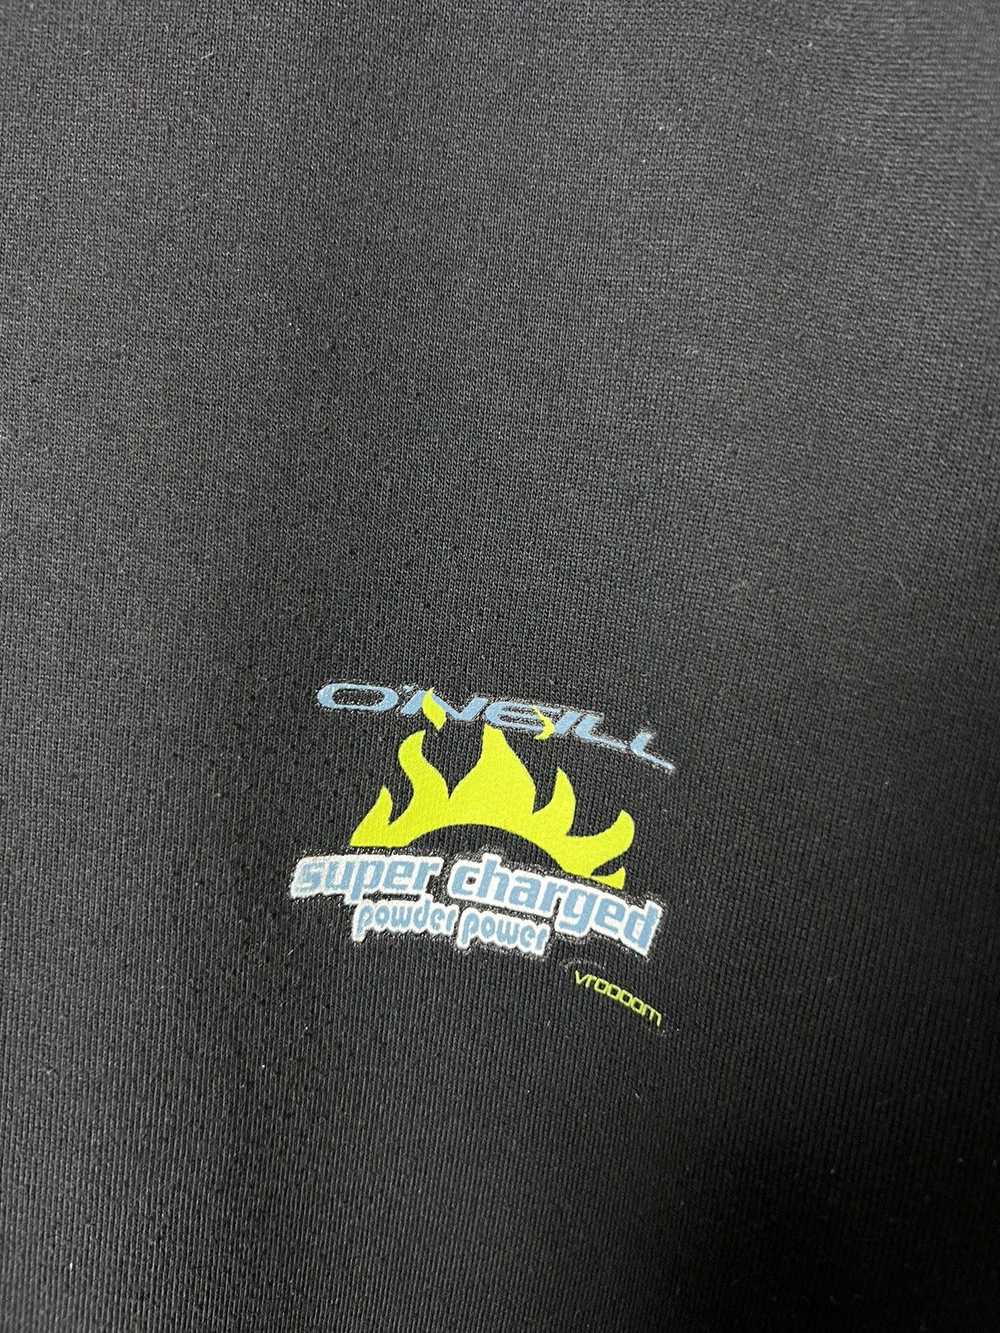 Oneill × Surf Style × Vintage Very Rare Vintage O… - image 6